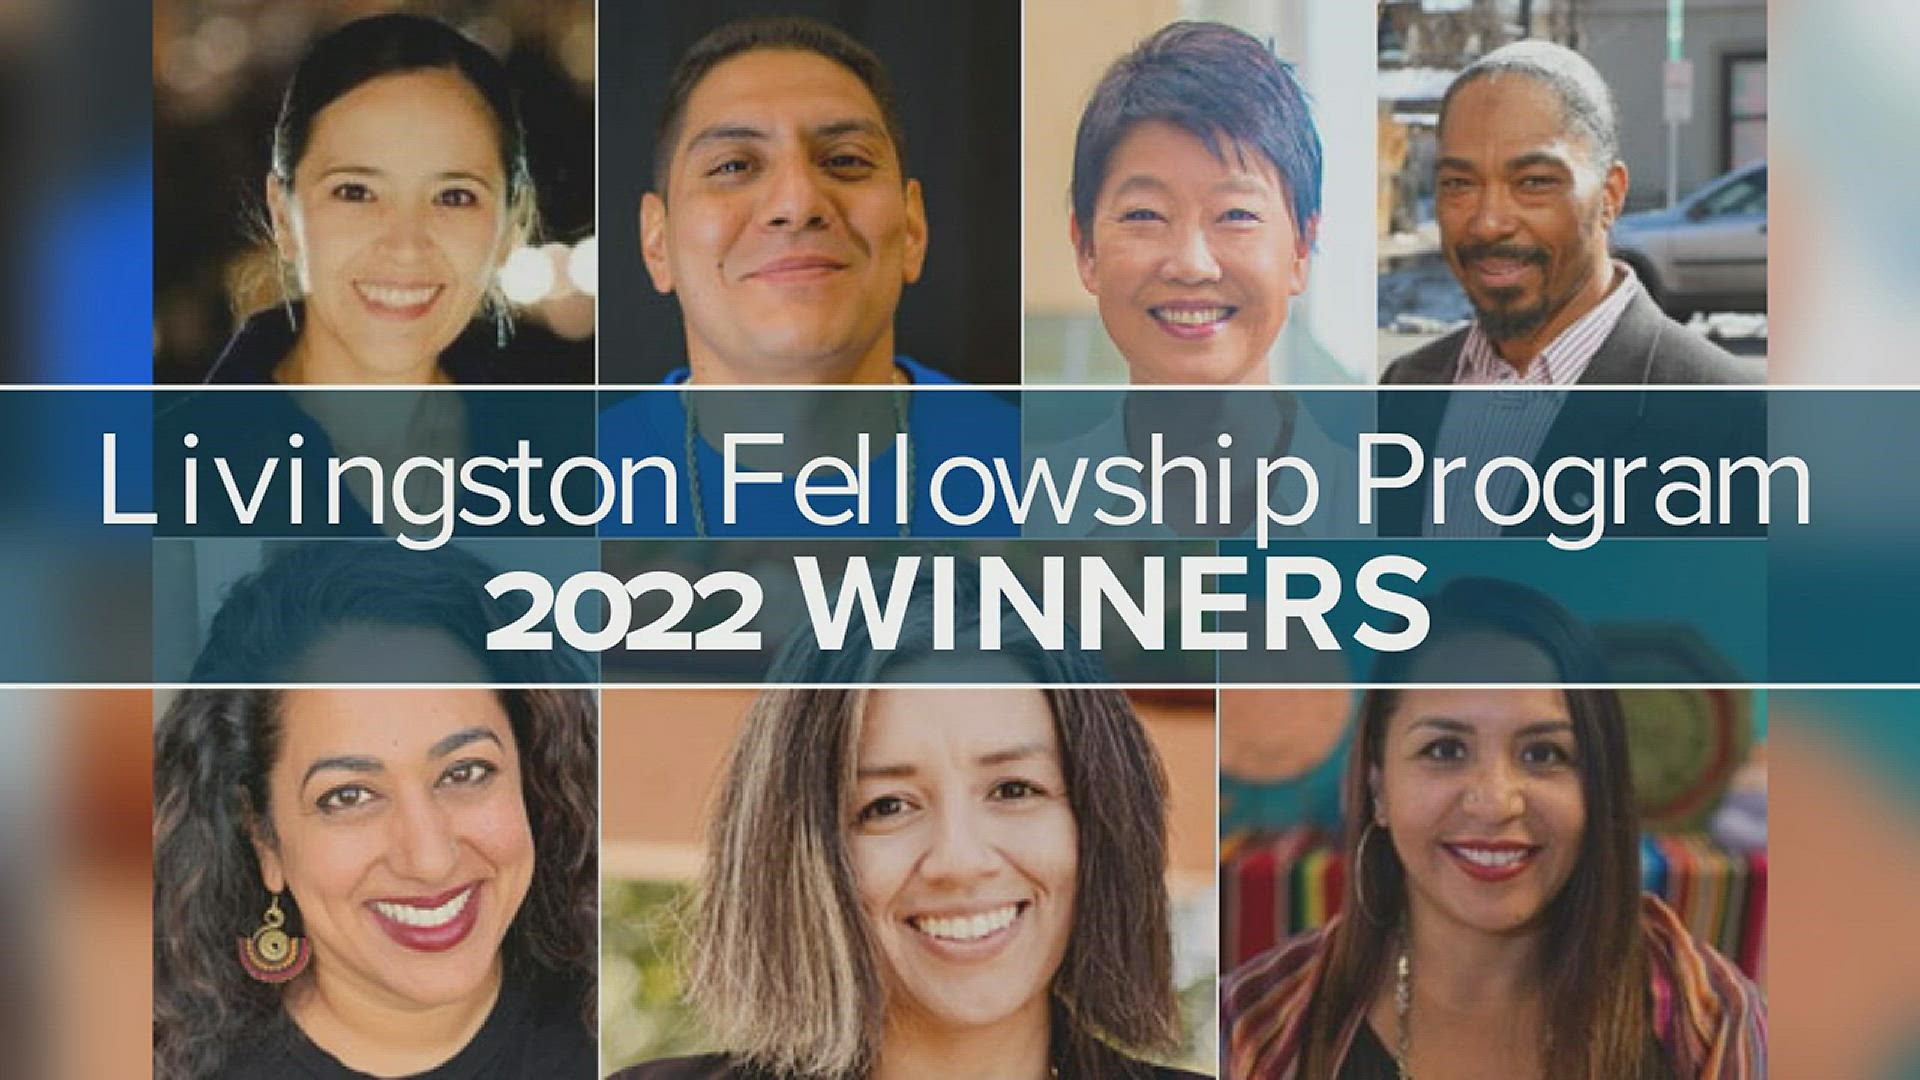 Since 2005, the Livingston Fellowship Program has supported Colorado nonprofit leaders by providing opportunities to expand their professional growth.